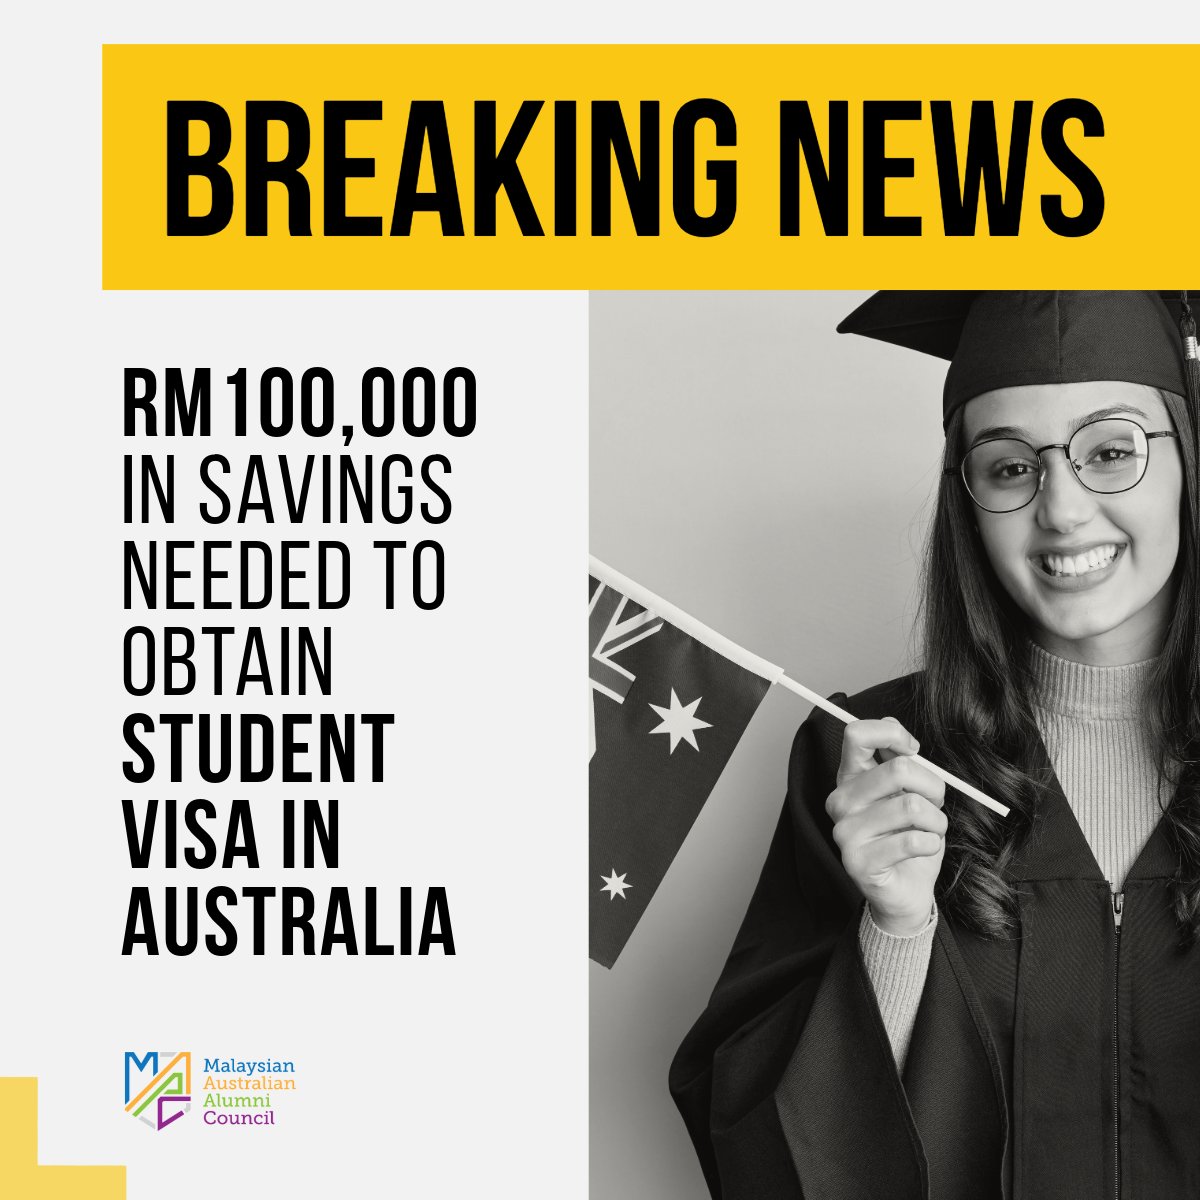 🚨 Attention Malaysian students! 🚨 Big news for those planning to study Down Under: Australia just upped the ante with a new minimum savings requirement of A$29,710 for student visas. Stay tuned for more updates! 
#StudyinAustralia #StudentVisa #Australia